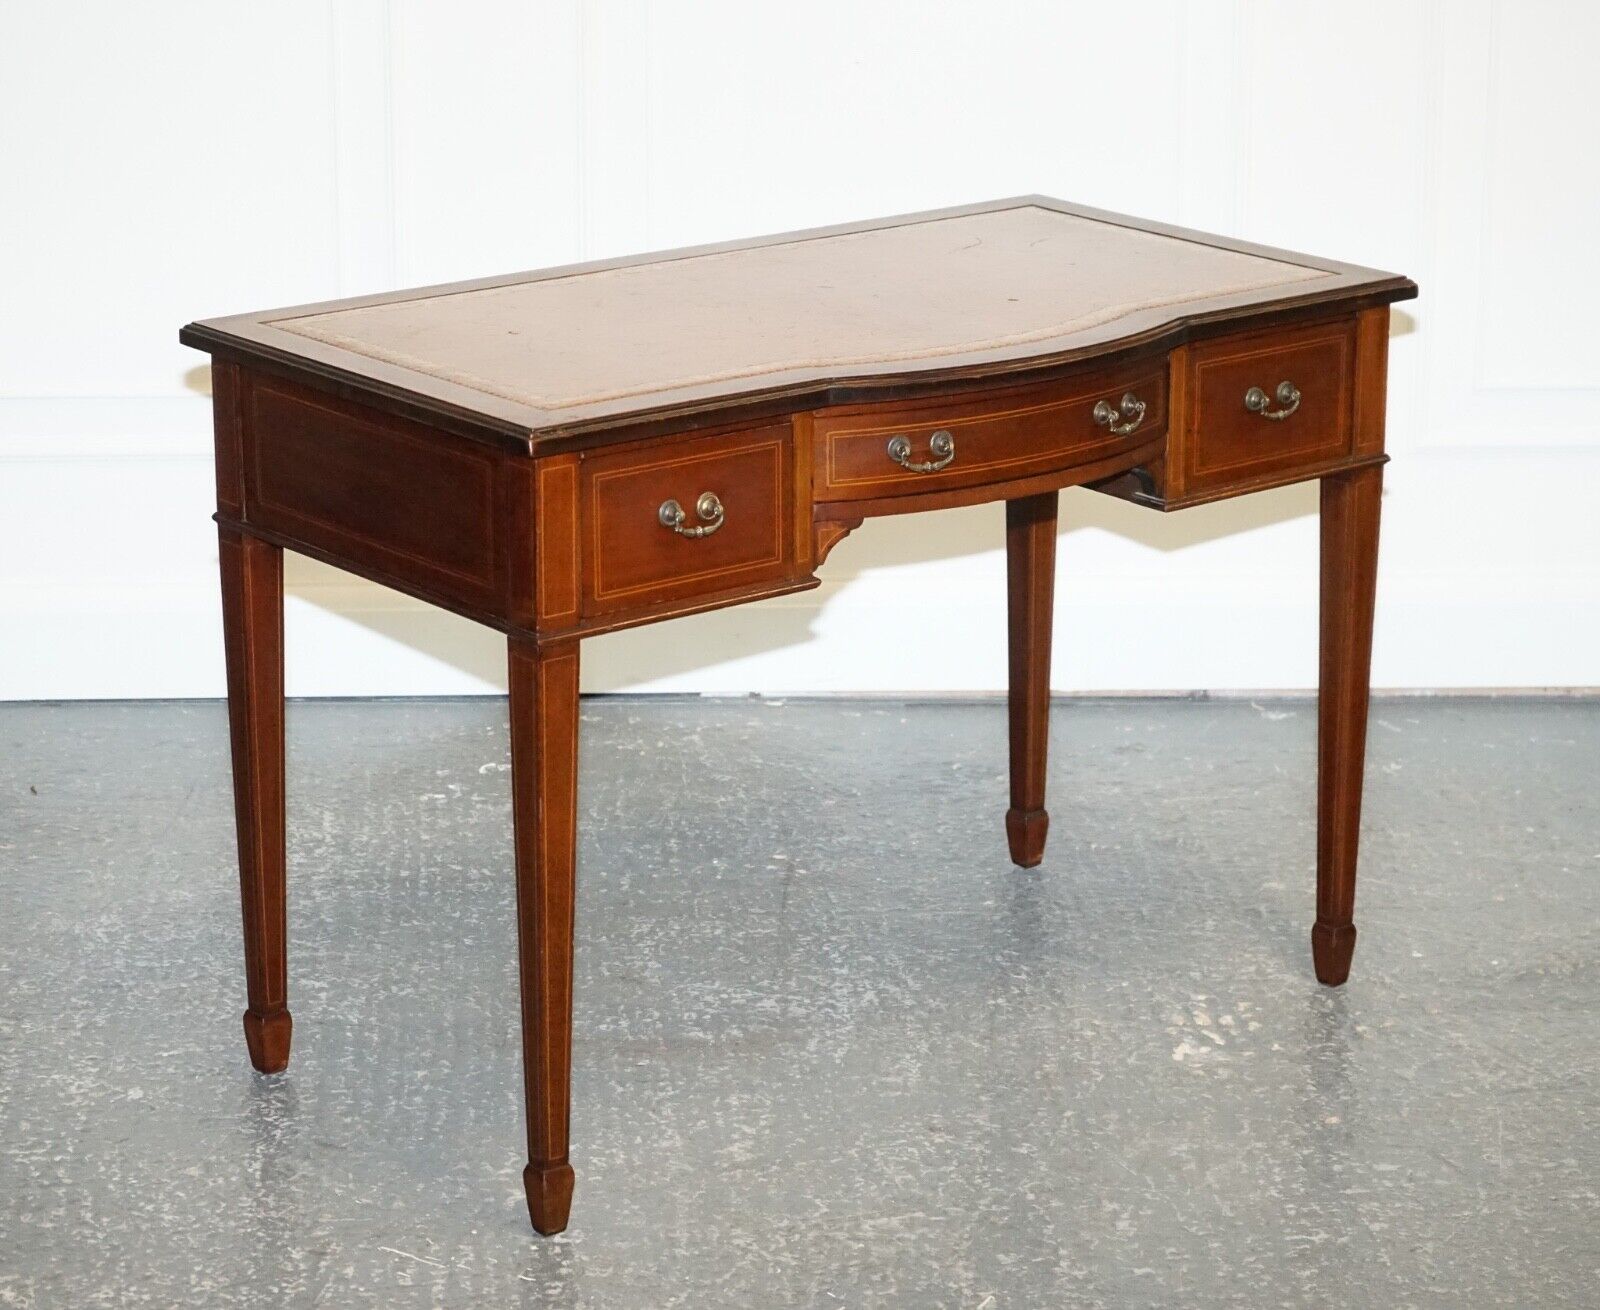 EDWARDIAN 1880s STAMPED MAPLE & CO BROWN LEATHER SHERATON WRITING DESK TABLE